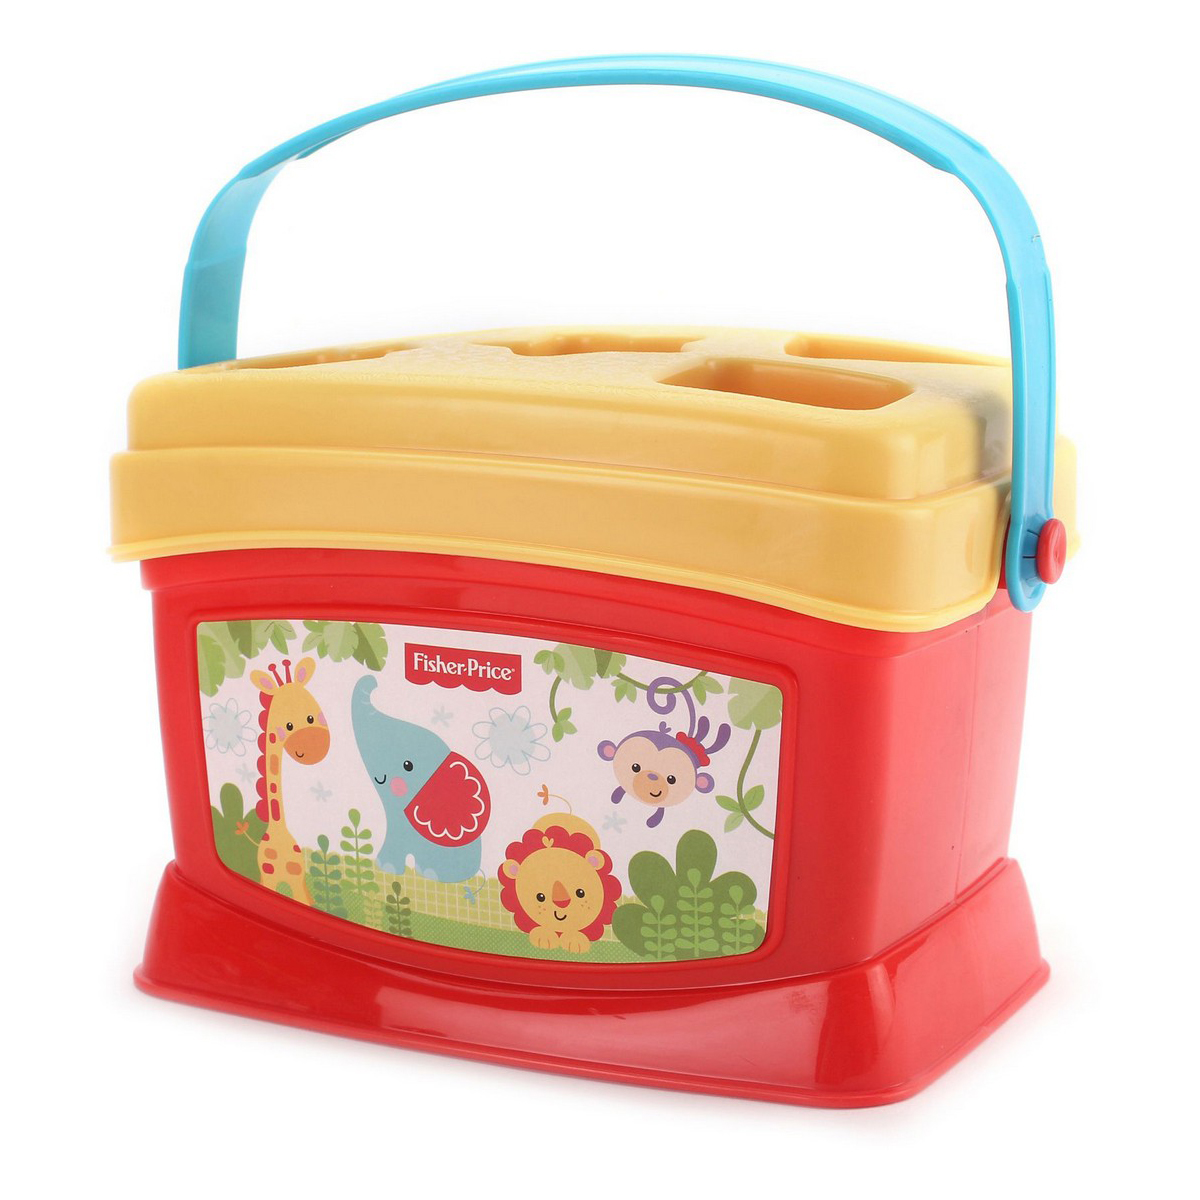 Fisher Price Baby’s First Blocks- Multicolor